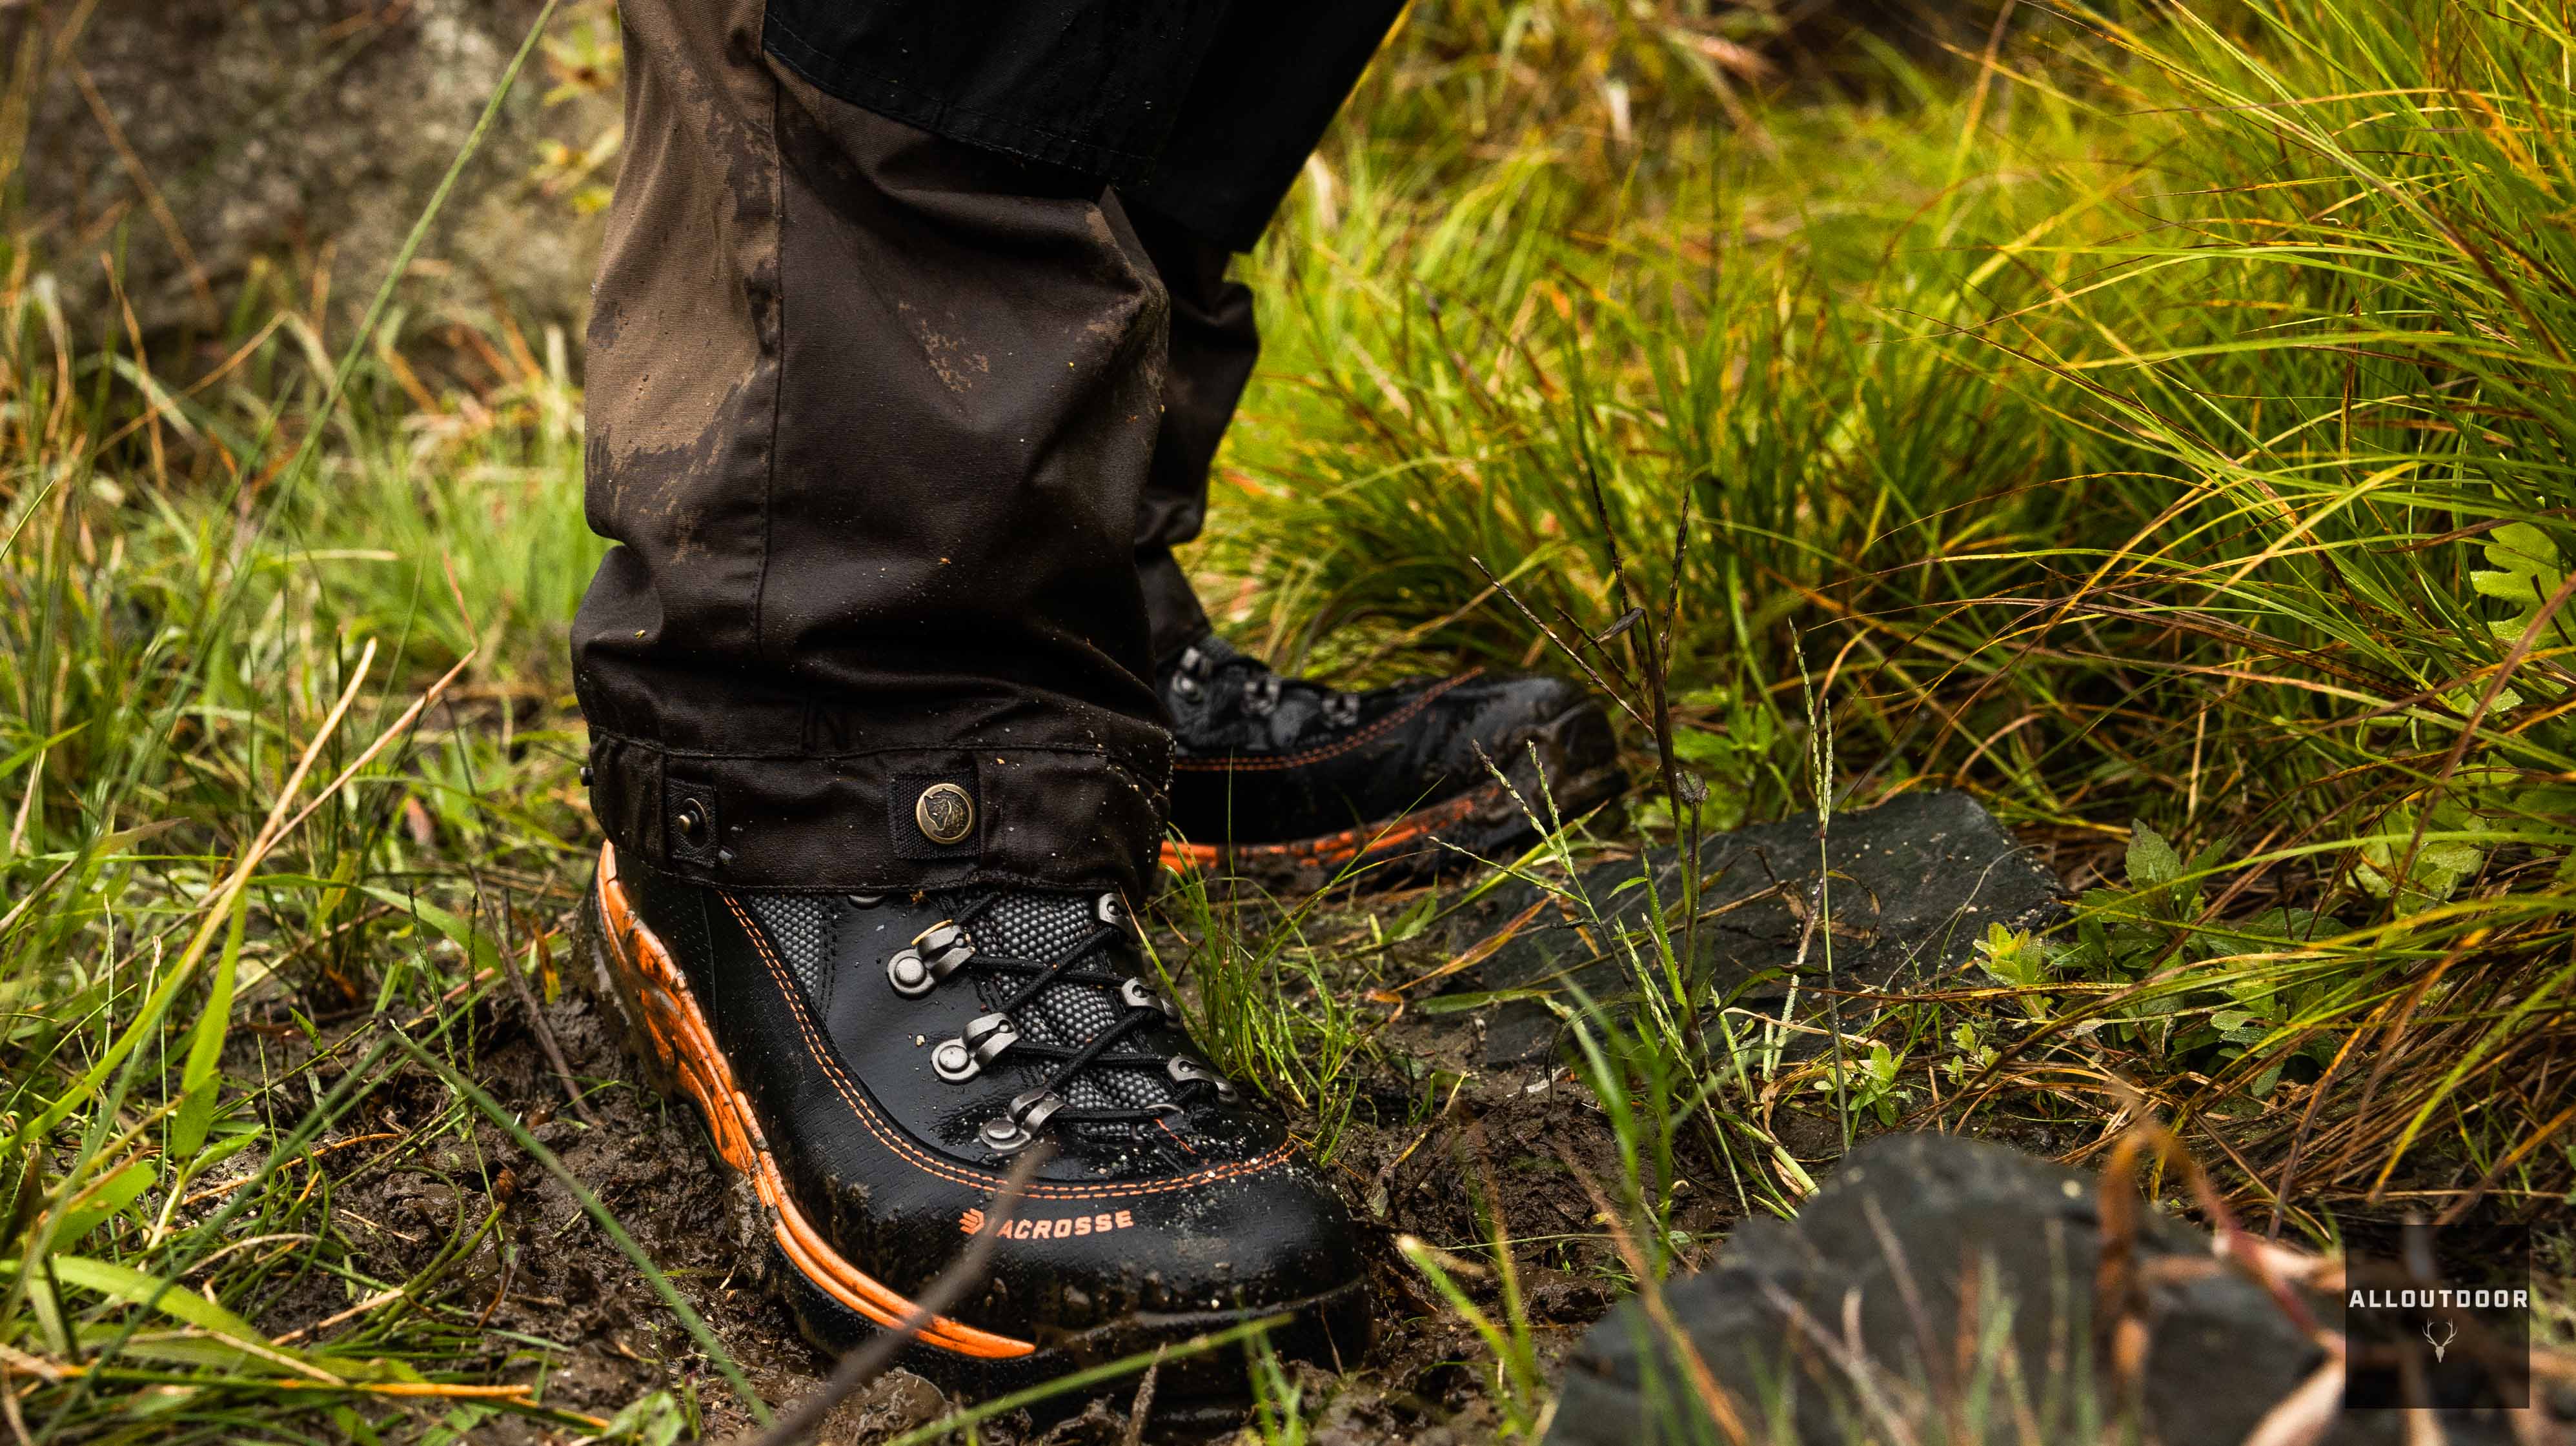 AllOutdoor Review - Lacrosse Ursa MS (Mid-Season) Hunting Boots